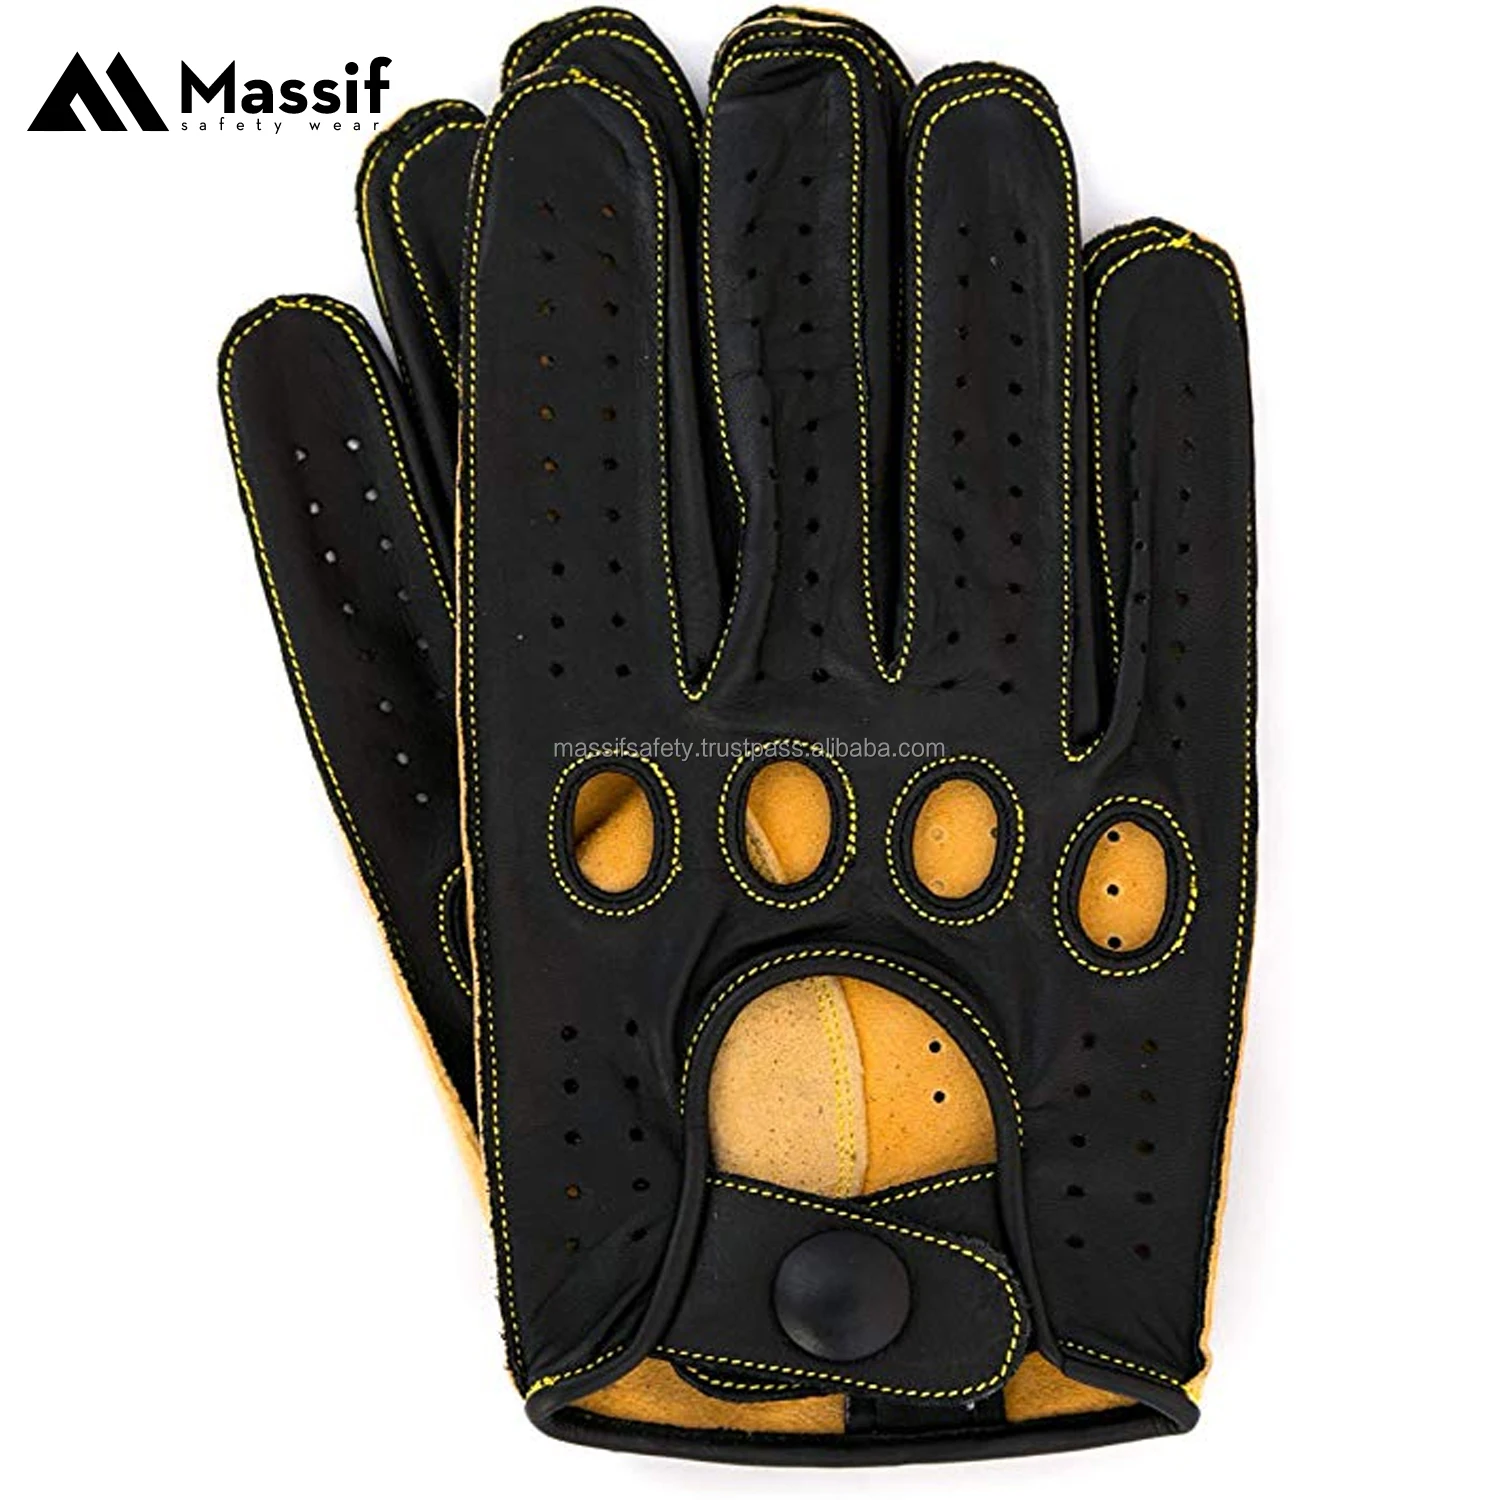 MEN'S CHAUFFEUR  REAL LAMBSKIN SHEEP NAPPA LEATHER CAR DRIVING GLOVES 